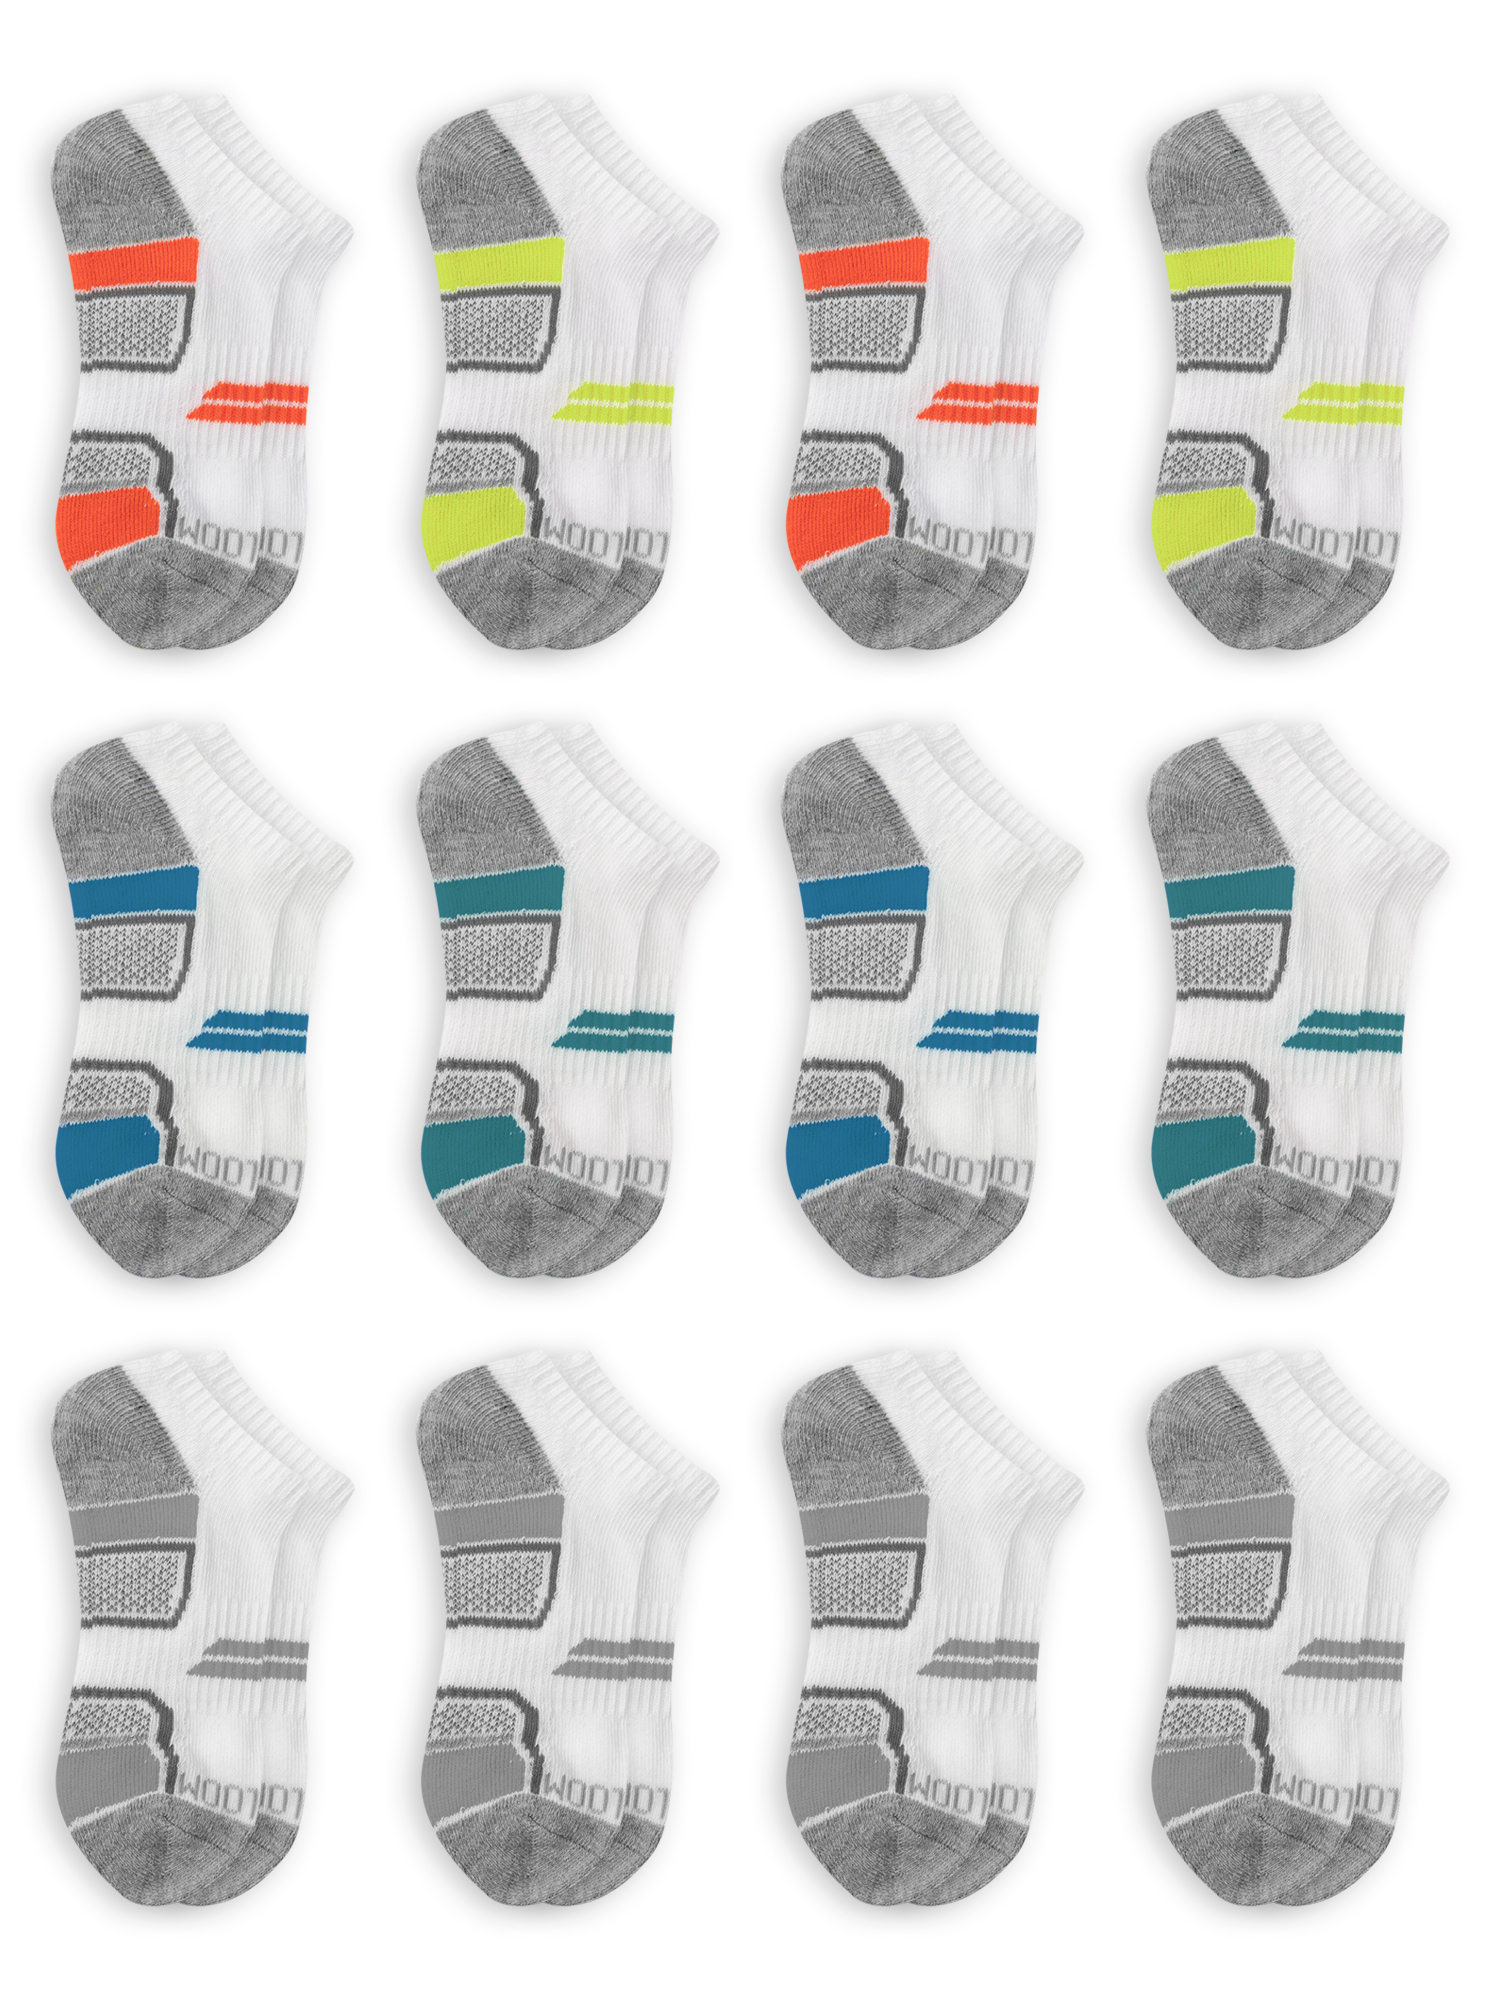 Fruit of the Loom Boys Active No Show Socks,12 Pack - image 1 of 4